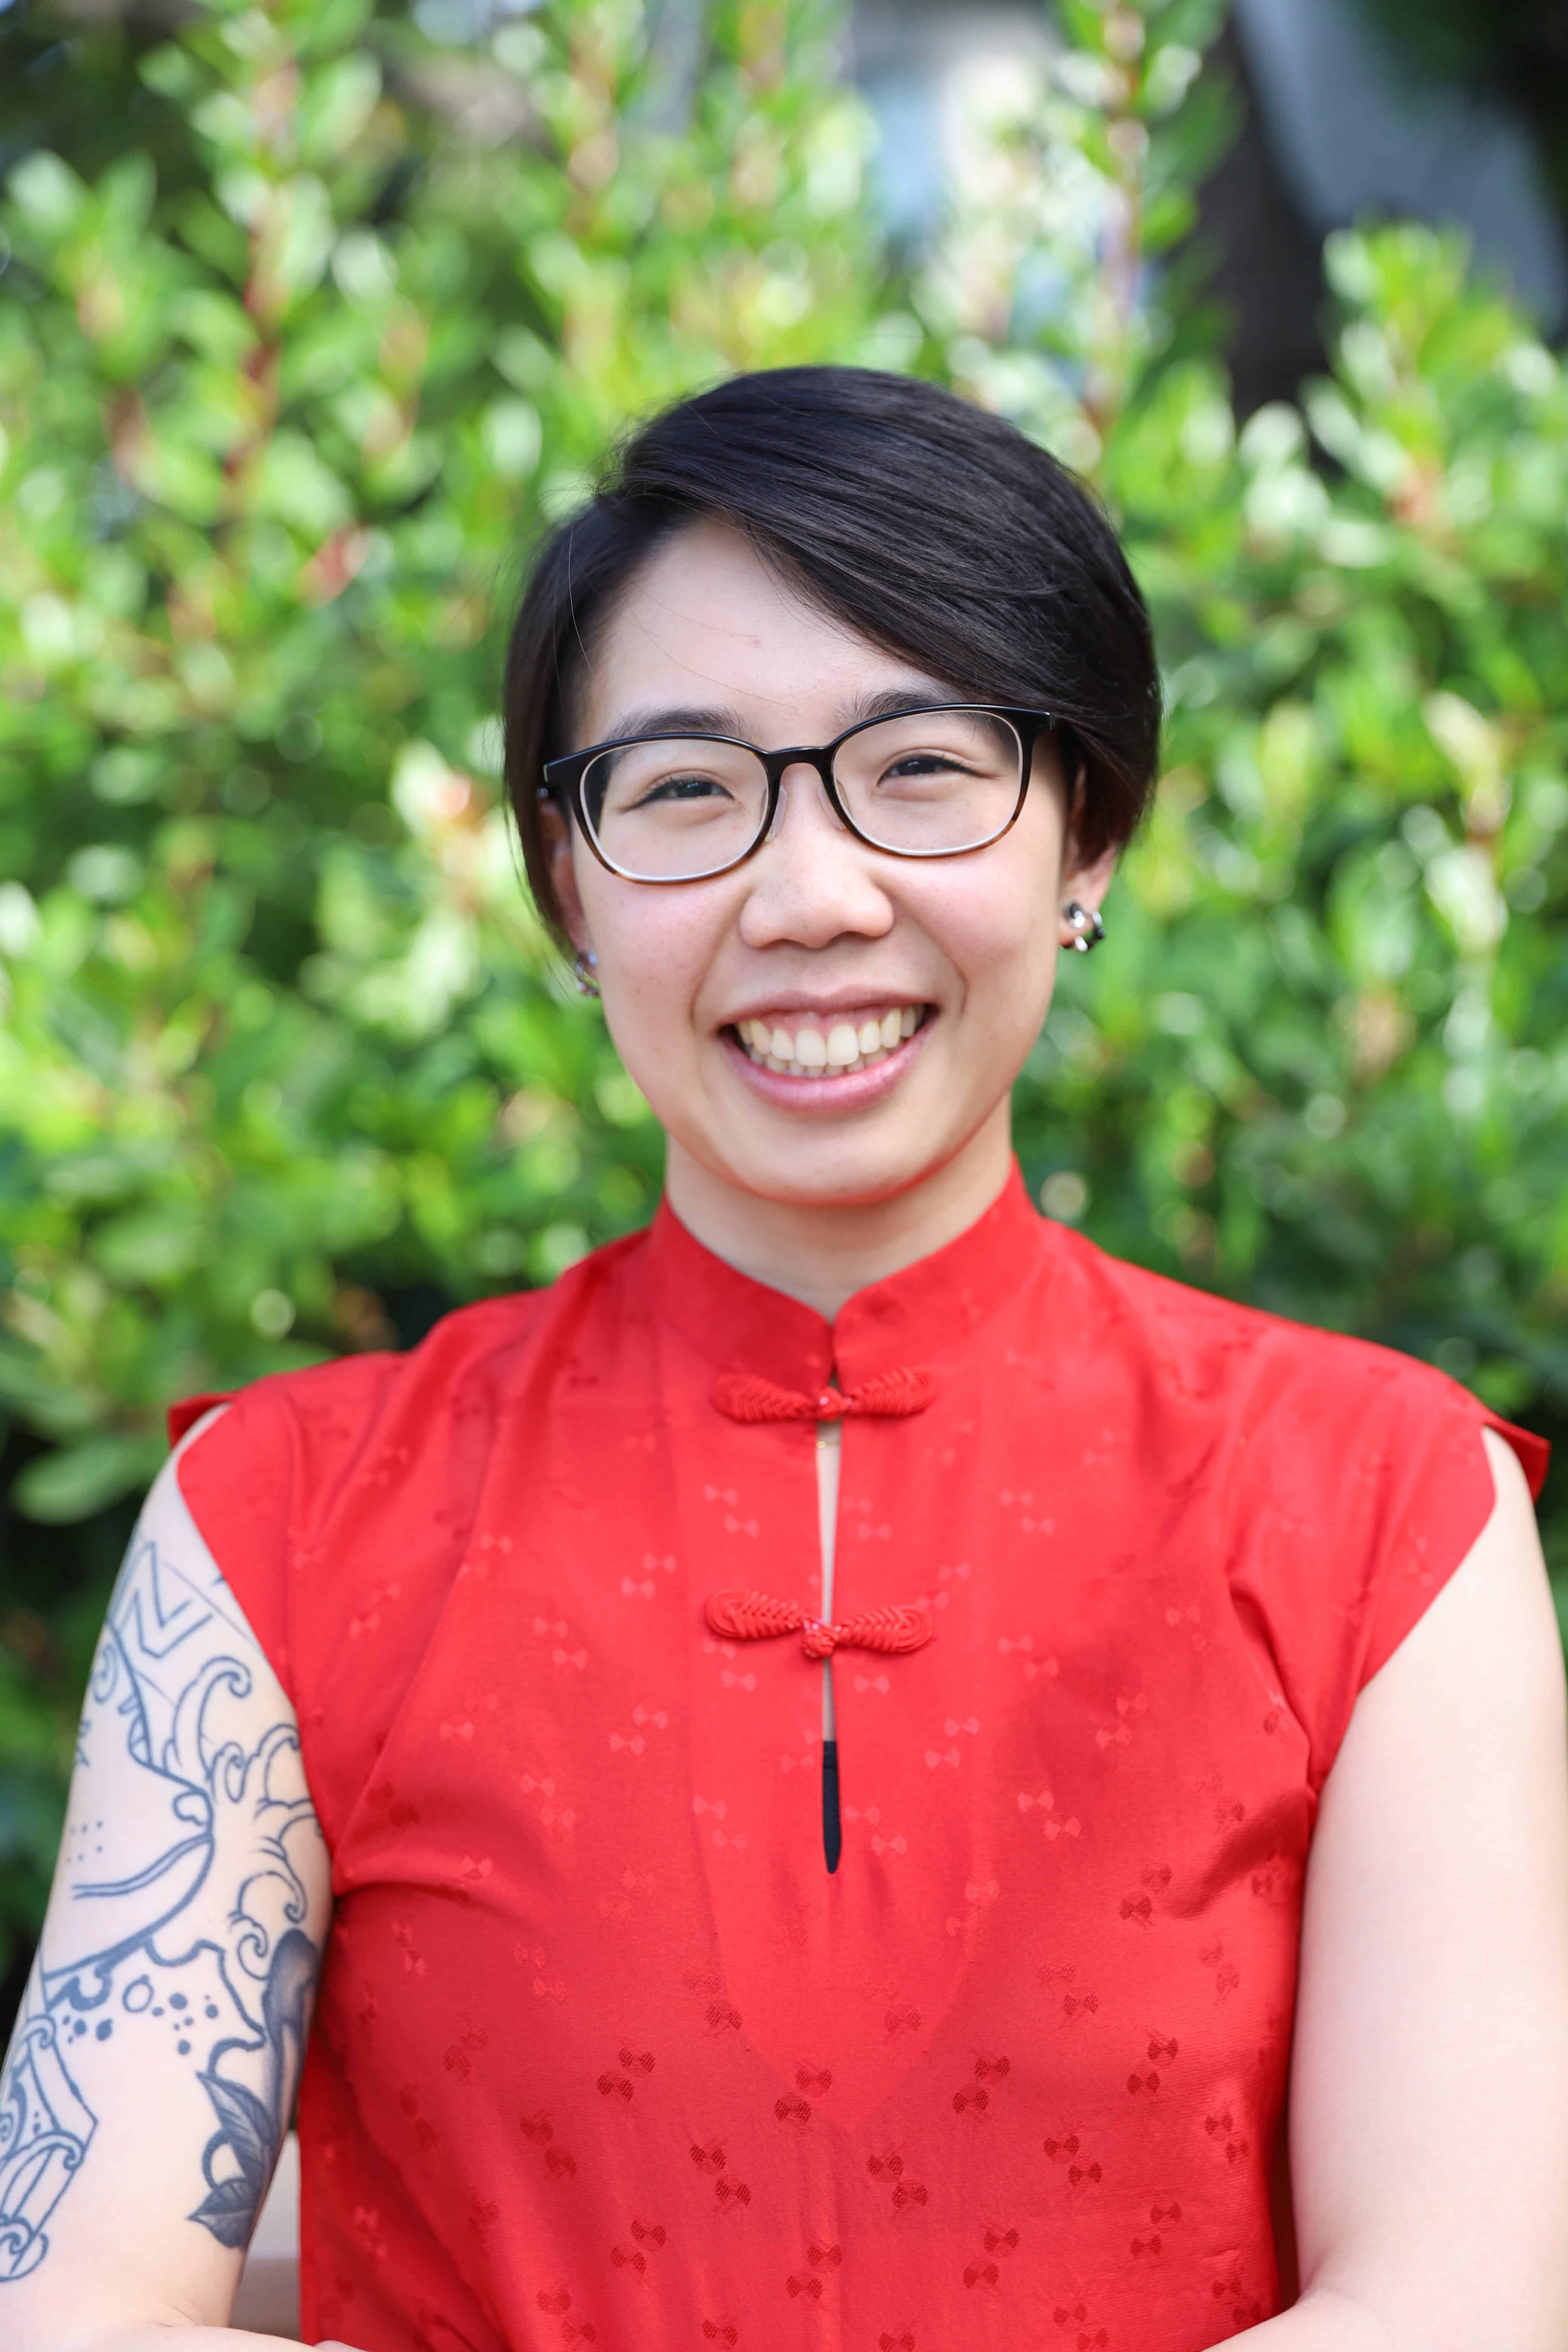 Headshot of Dr. Justine Fan (ze/zer), an Asian American psychologist with short hair in a red blouse. A half sleeve tattoo is visible.